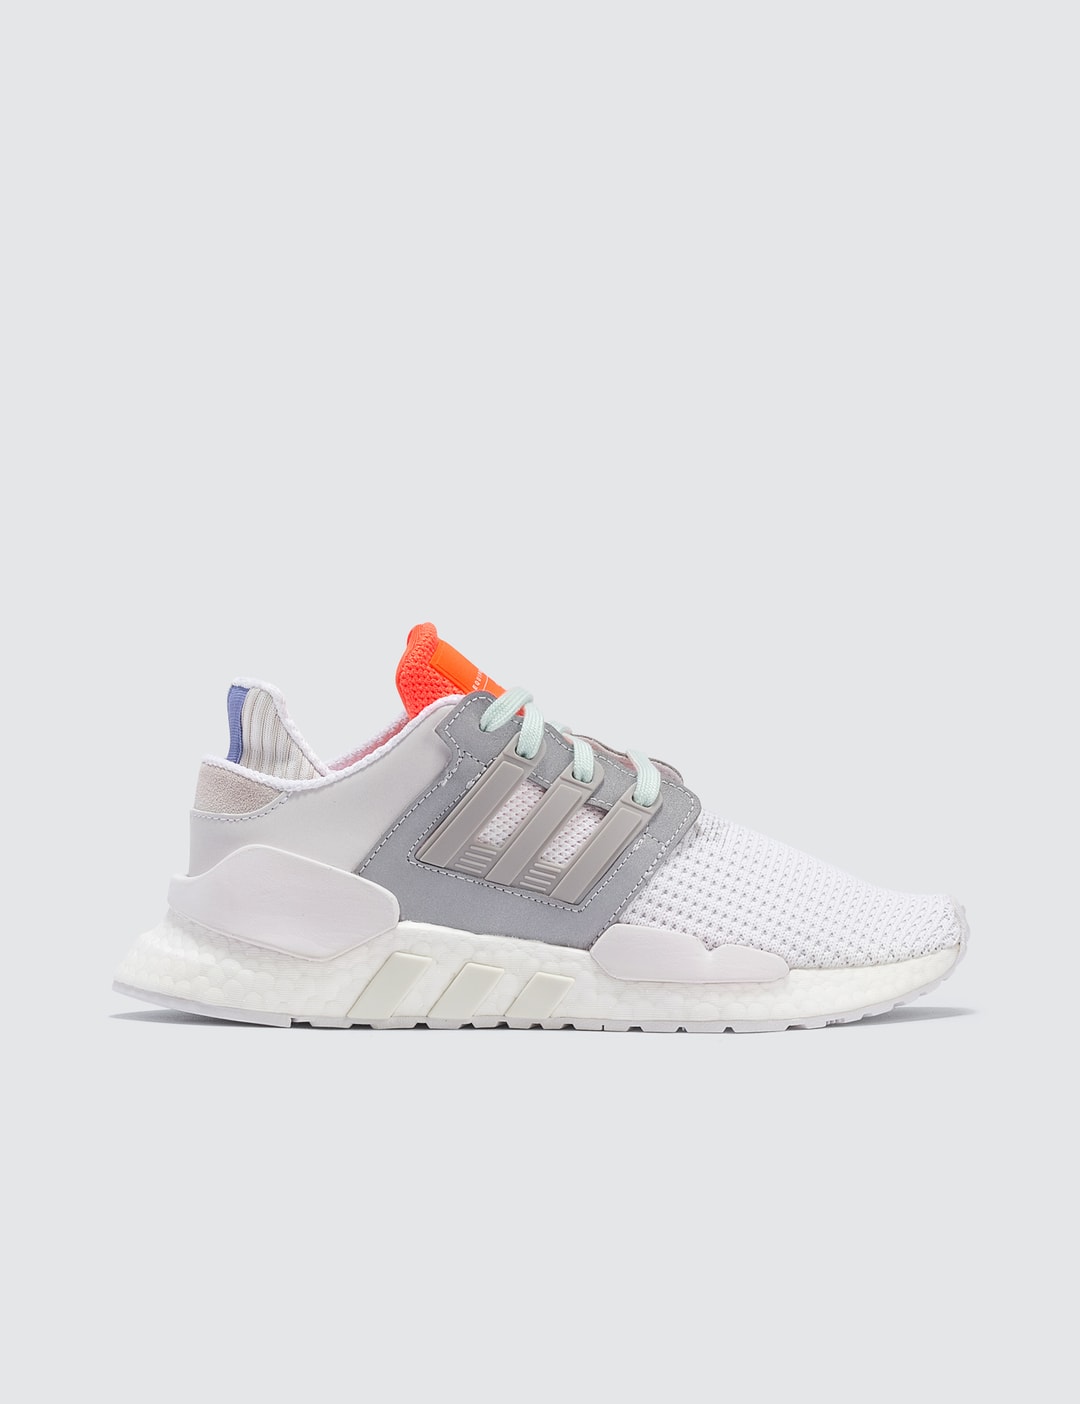 Adidas - Eqt 91/18 | - Globally Curated Fashion and Lifestyle by Hypebeast